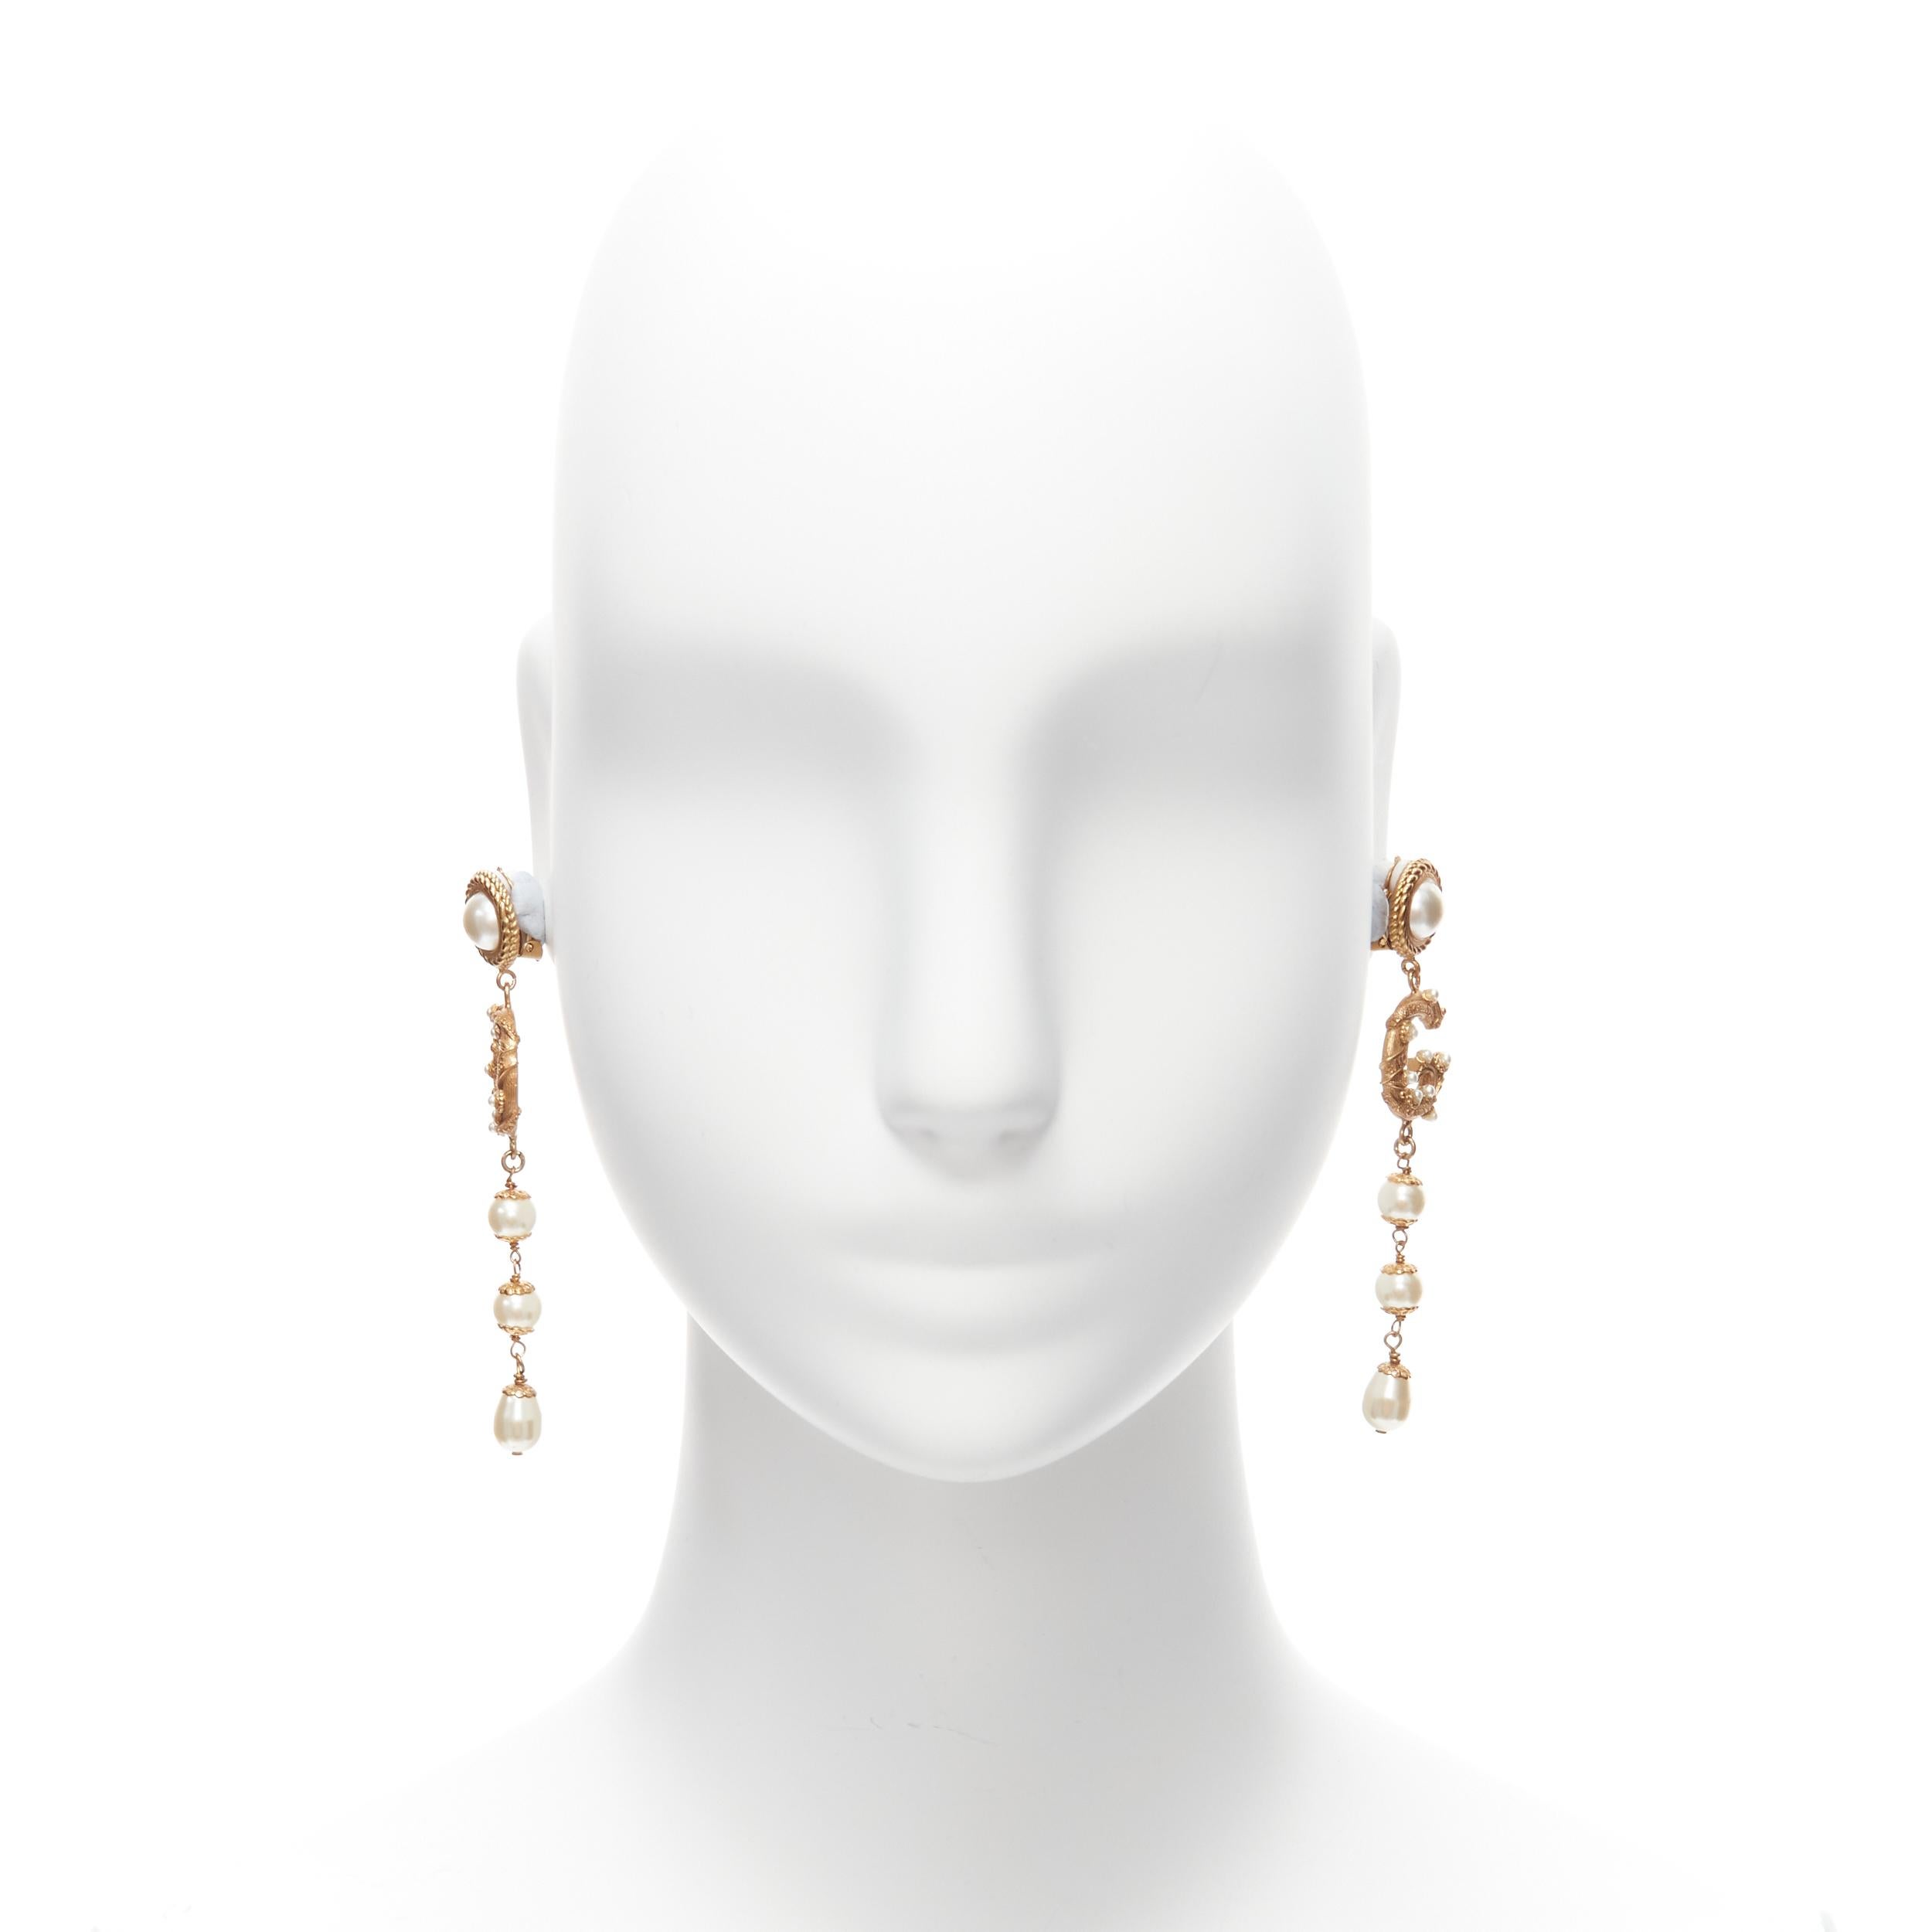 rare DOLCE GABBANA gold tone DG logo baroque pearl tiered drop clip earrings
Reference: TGAS/D00185
Brand: Dolce Gabbana
Designer: Domenico Dolce and Stefano Gabbana
Material: Metal, Faux Pearl
Color: Gold, Pearl
Pattern: Solid
Closure: Clip